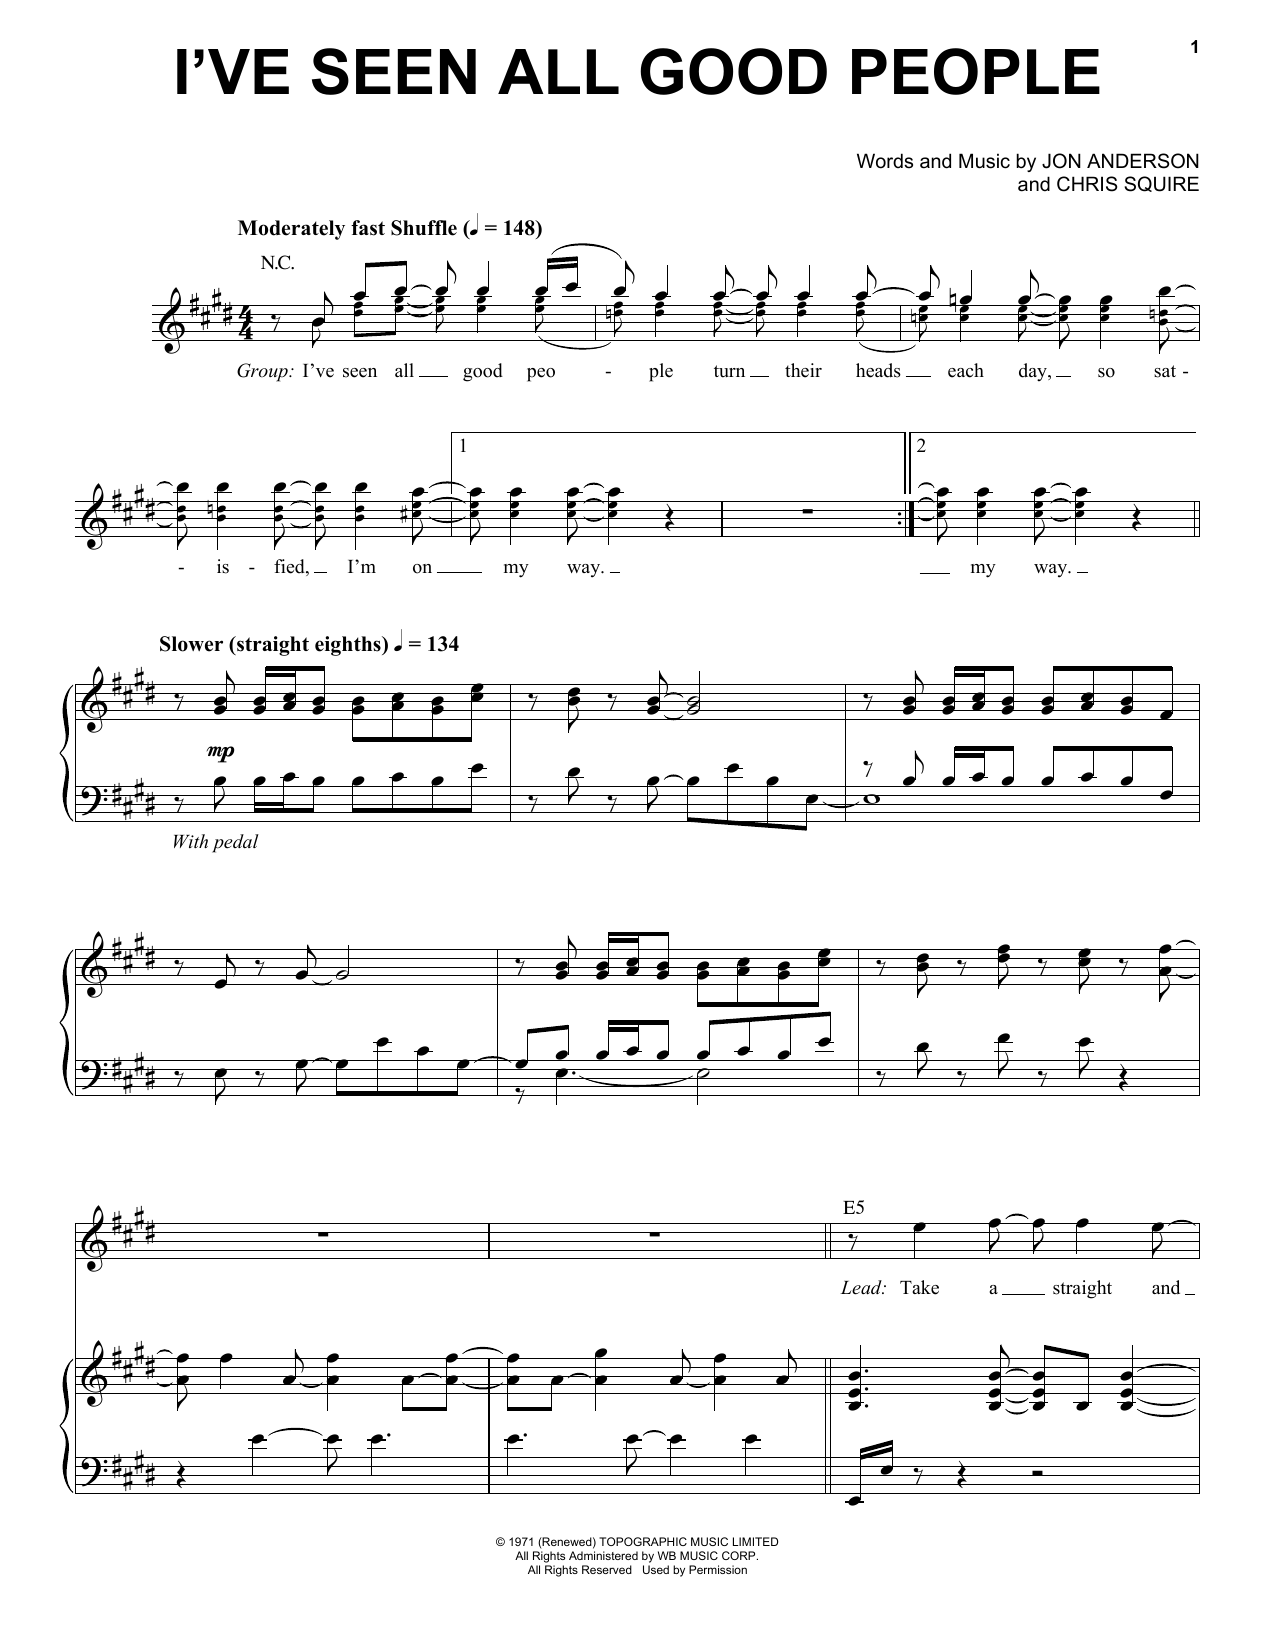 Download Yes I've Seen All Good People Sheet Music